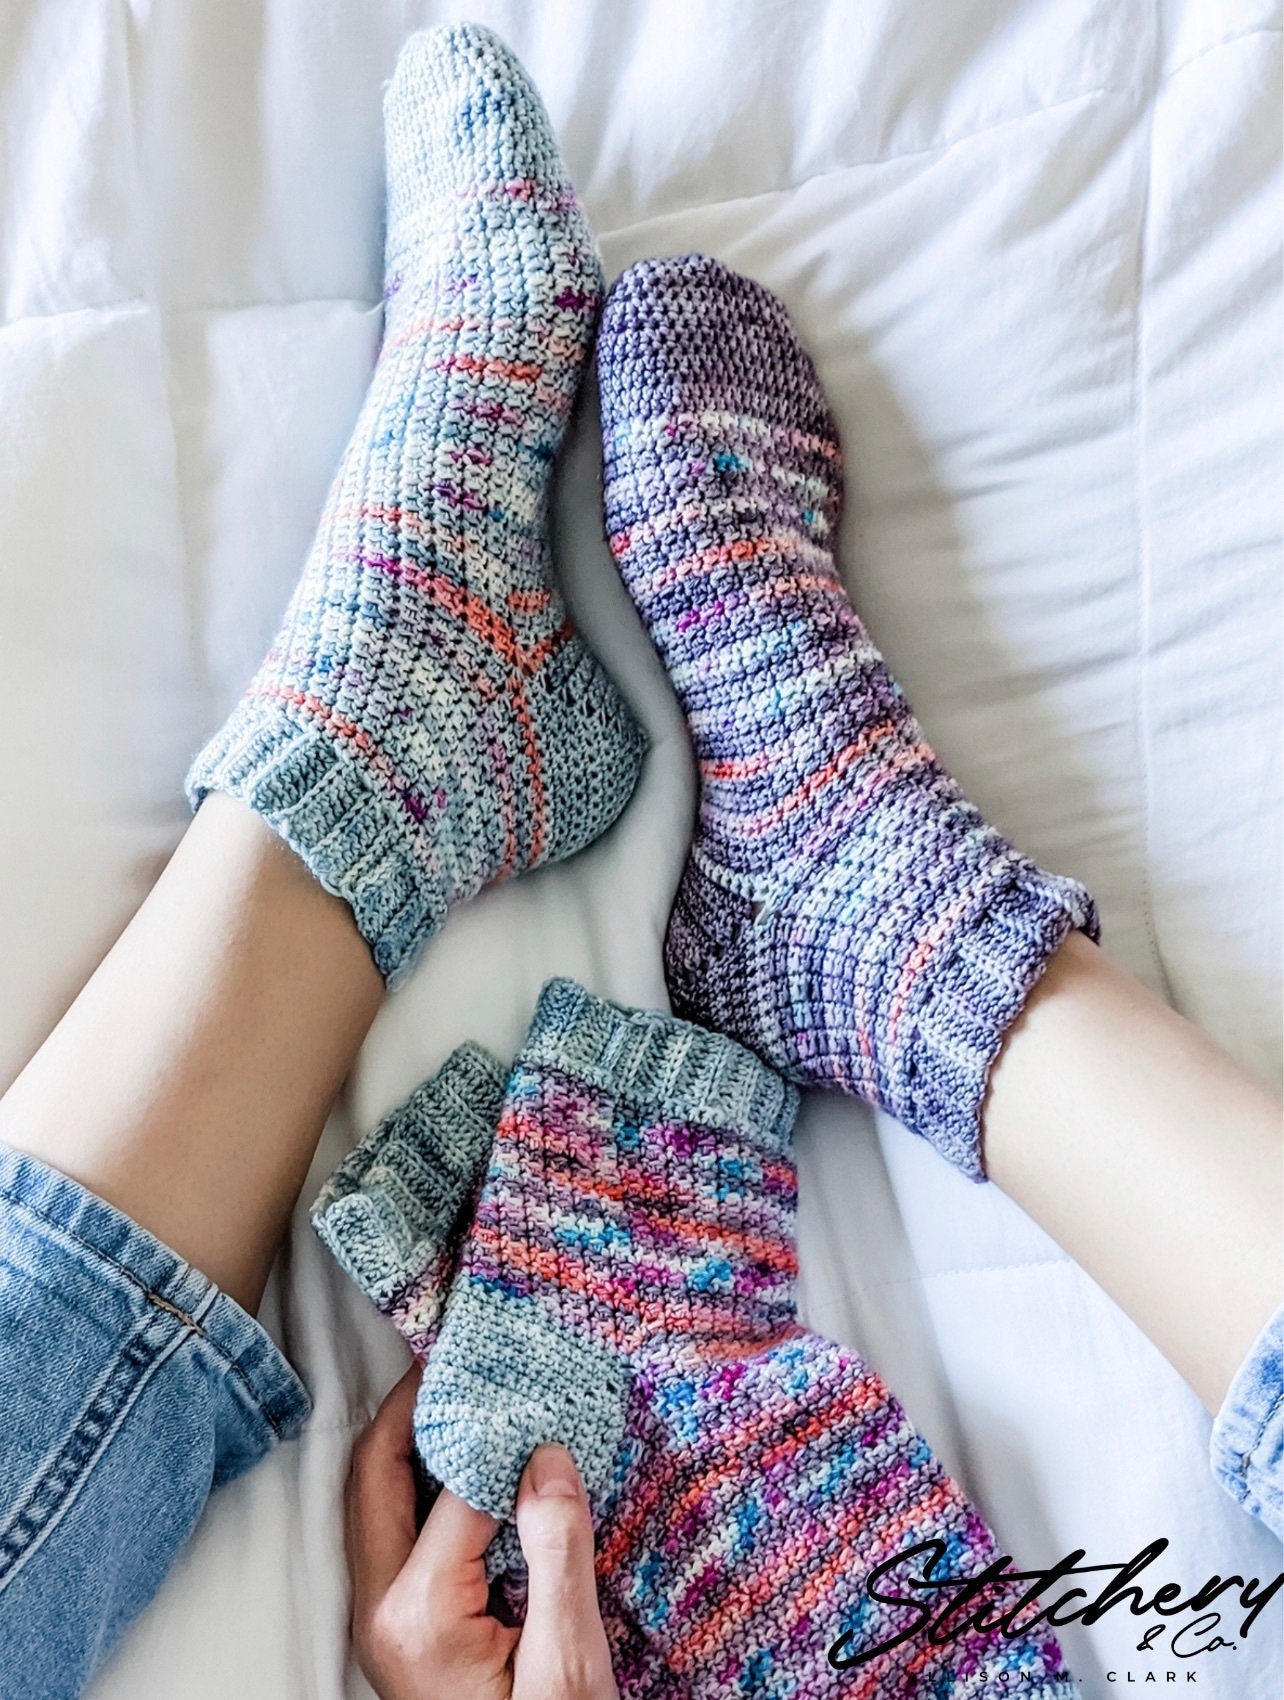 Socks created by Alison of Stitchery and Co using our Edgar Allan Poe, Blue Ridge, and Teresina hand-dyed yarn colorways.